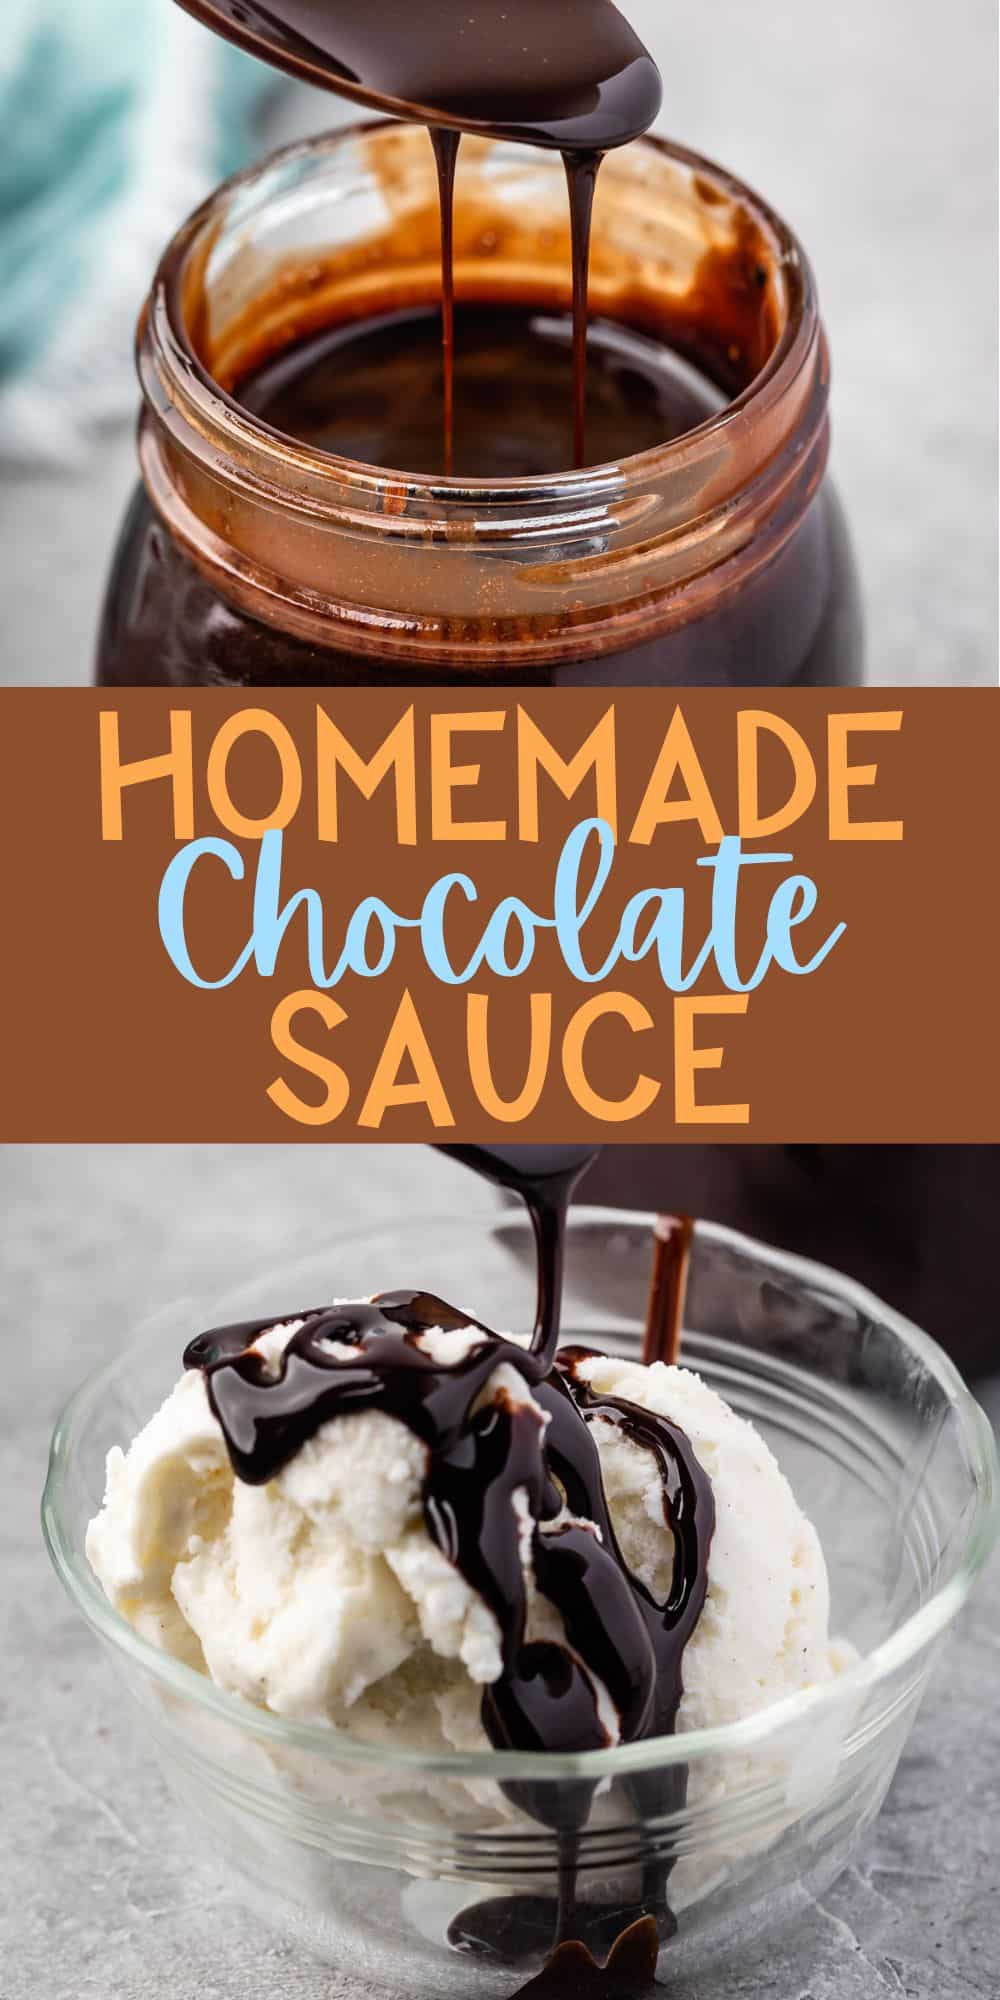 two photos of a spoon scooping chocolate sauce out of a clear jar with words on the image.